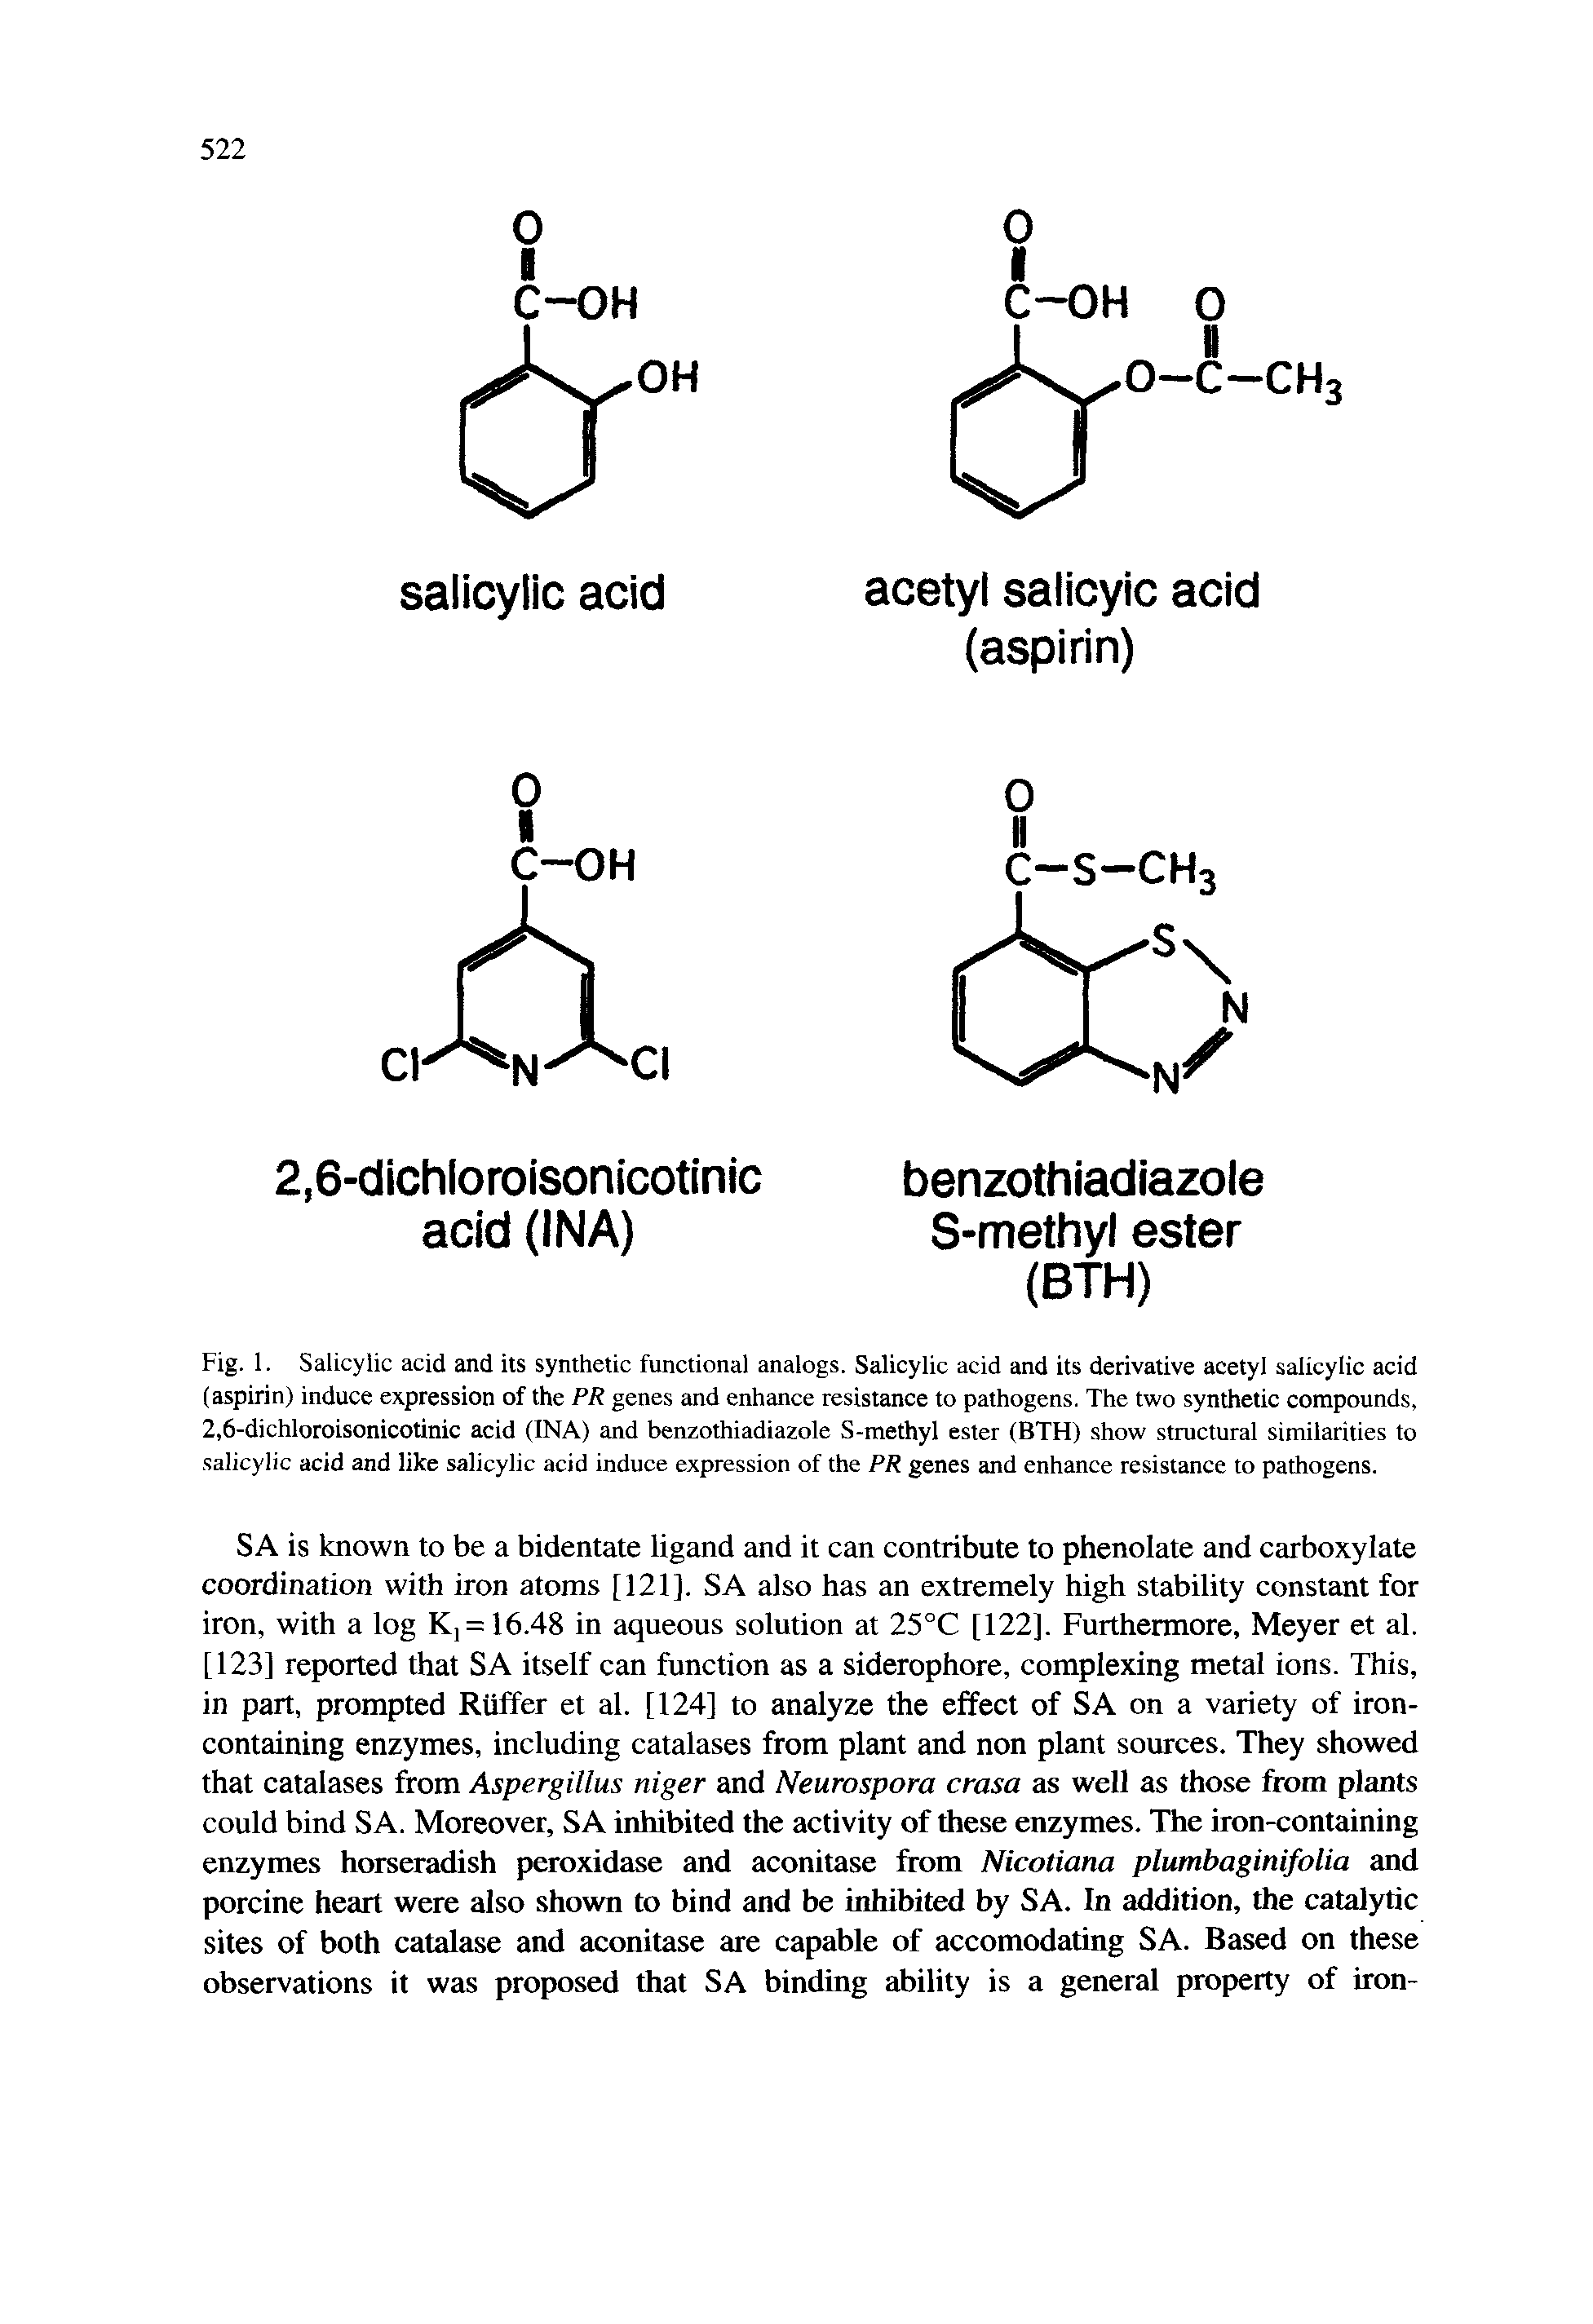 Fig. 1. Salicylic acid and its synthetic functional analogs. Salicylic acid and its derivative acetyl salicylic acid (aspirin) induce expression of the PR genes and enhance resistance to pathogens. The two synthetic compounds, 2,6-dichloroisonicotinic acid (INA) and benzothiadiazole S-methyl ester (BTH) show structural similarities to salicylic acid and like salicylic acid induce expression of the PR genes and enhance resistance to pathogens.